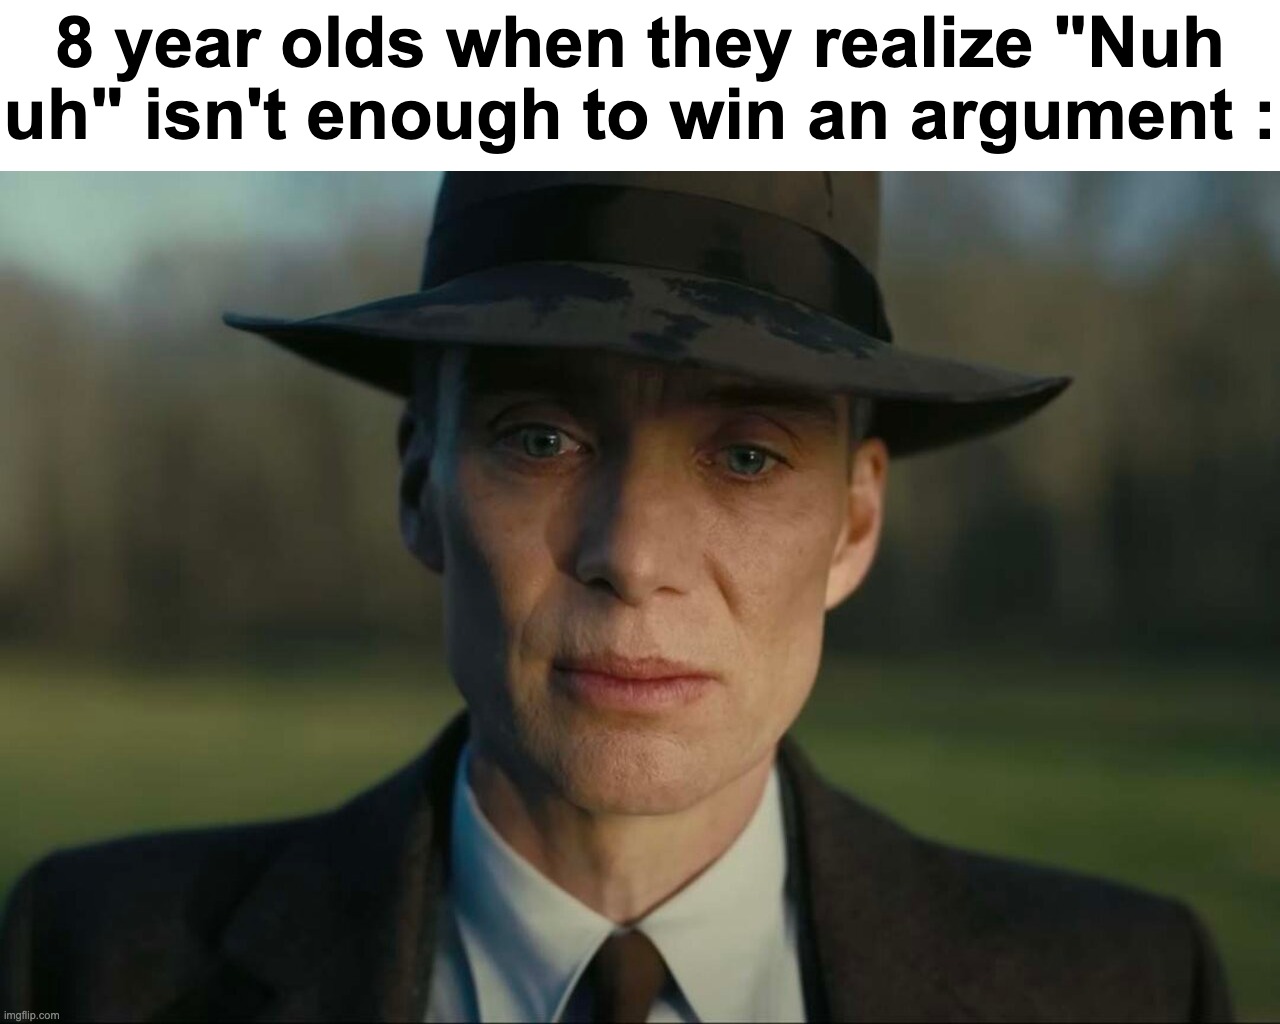 Then they use the Uno reverse card | 8 year olds when they realize "Nuh uh" isn't enough to win an argument : | image tagged in memes,funny,relatable,oppenheimer,sad,front page plz | made w/ Imgflip meme maker